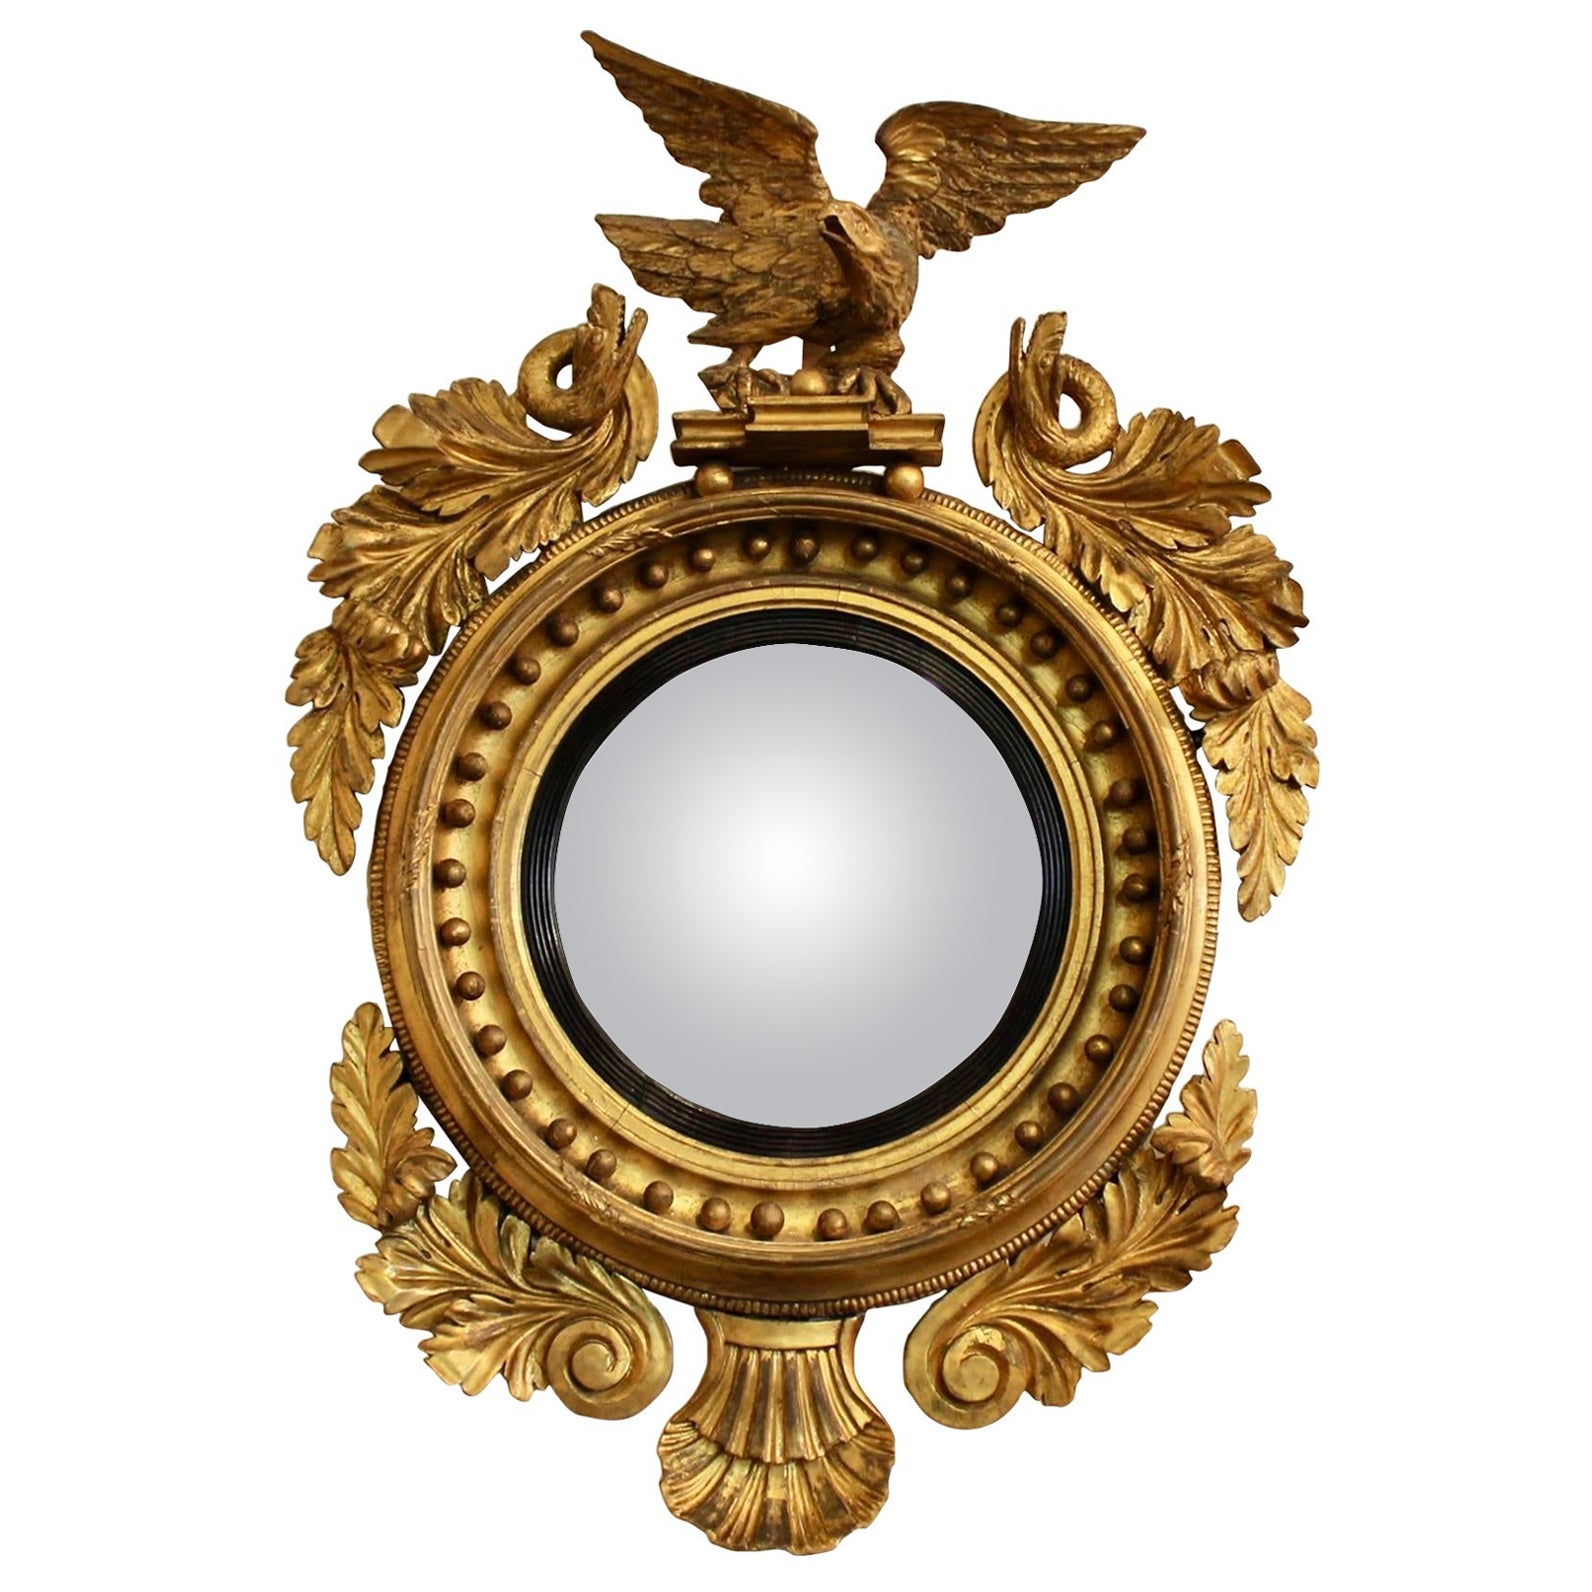 Regency Convex Giltwood Mirror With Eagle And Sea Serpents For Sale